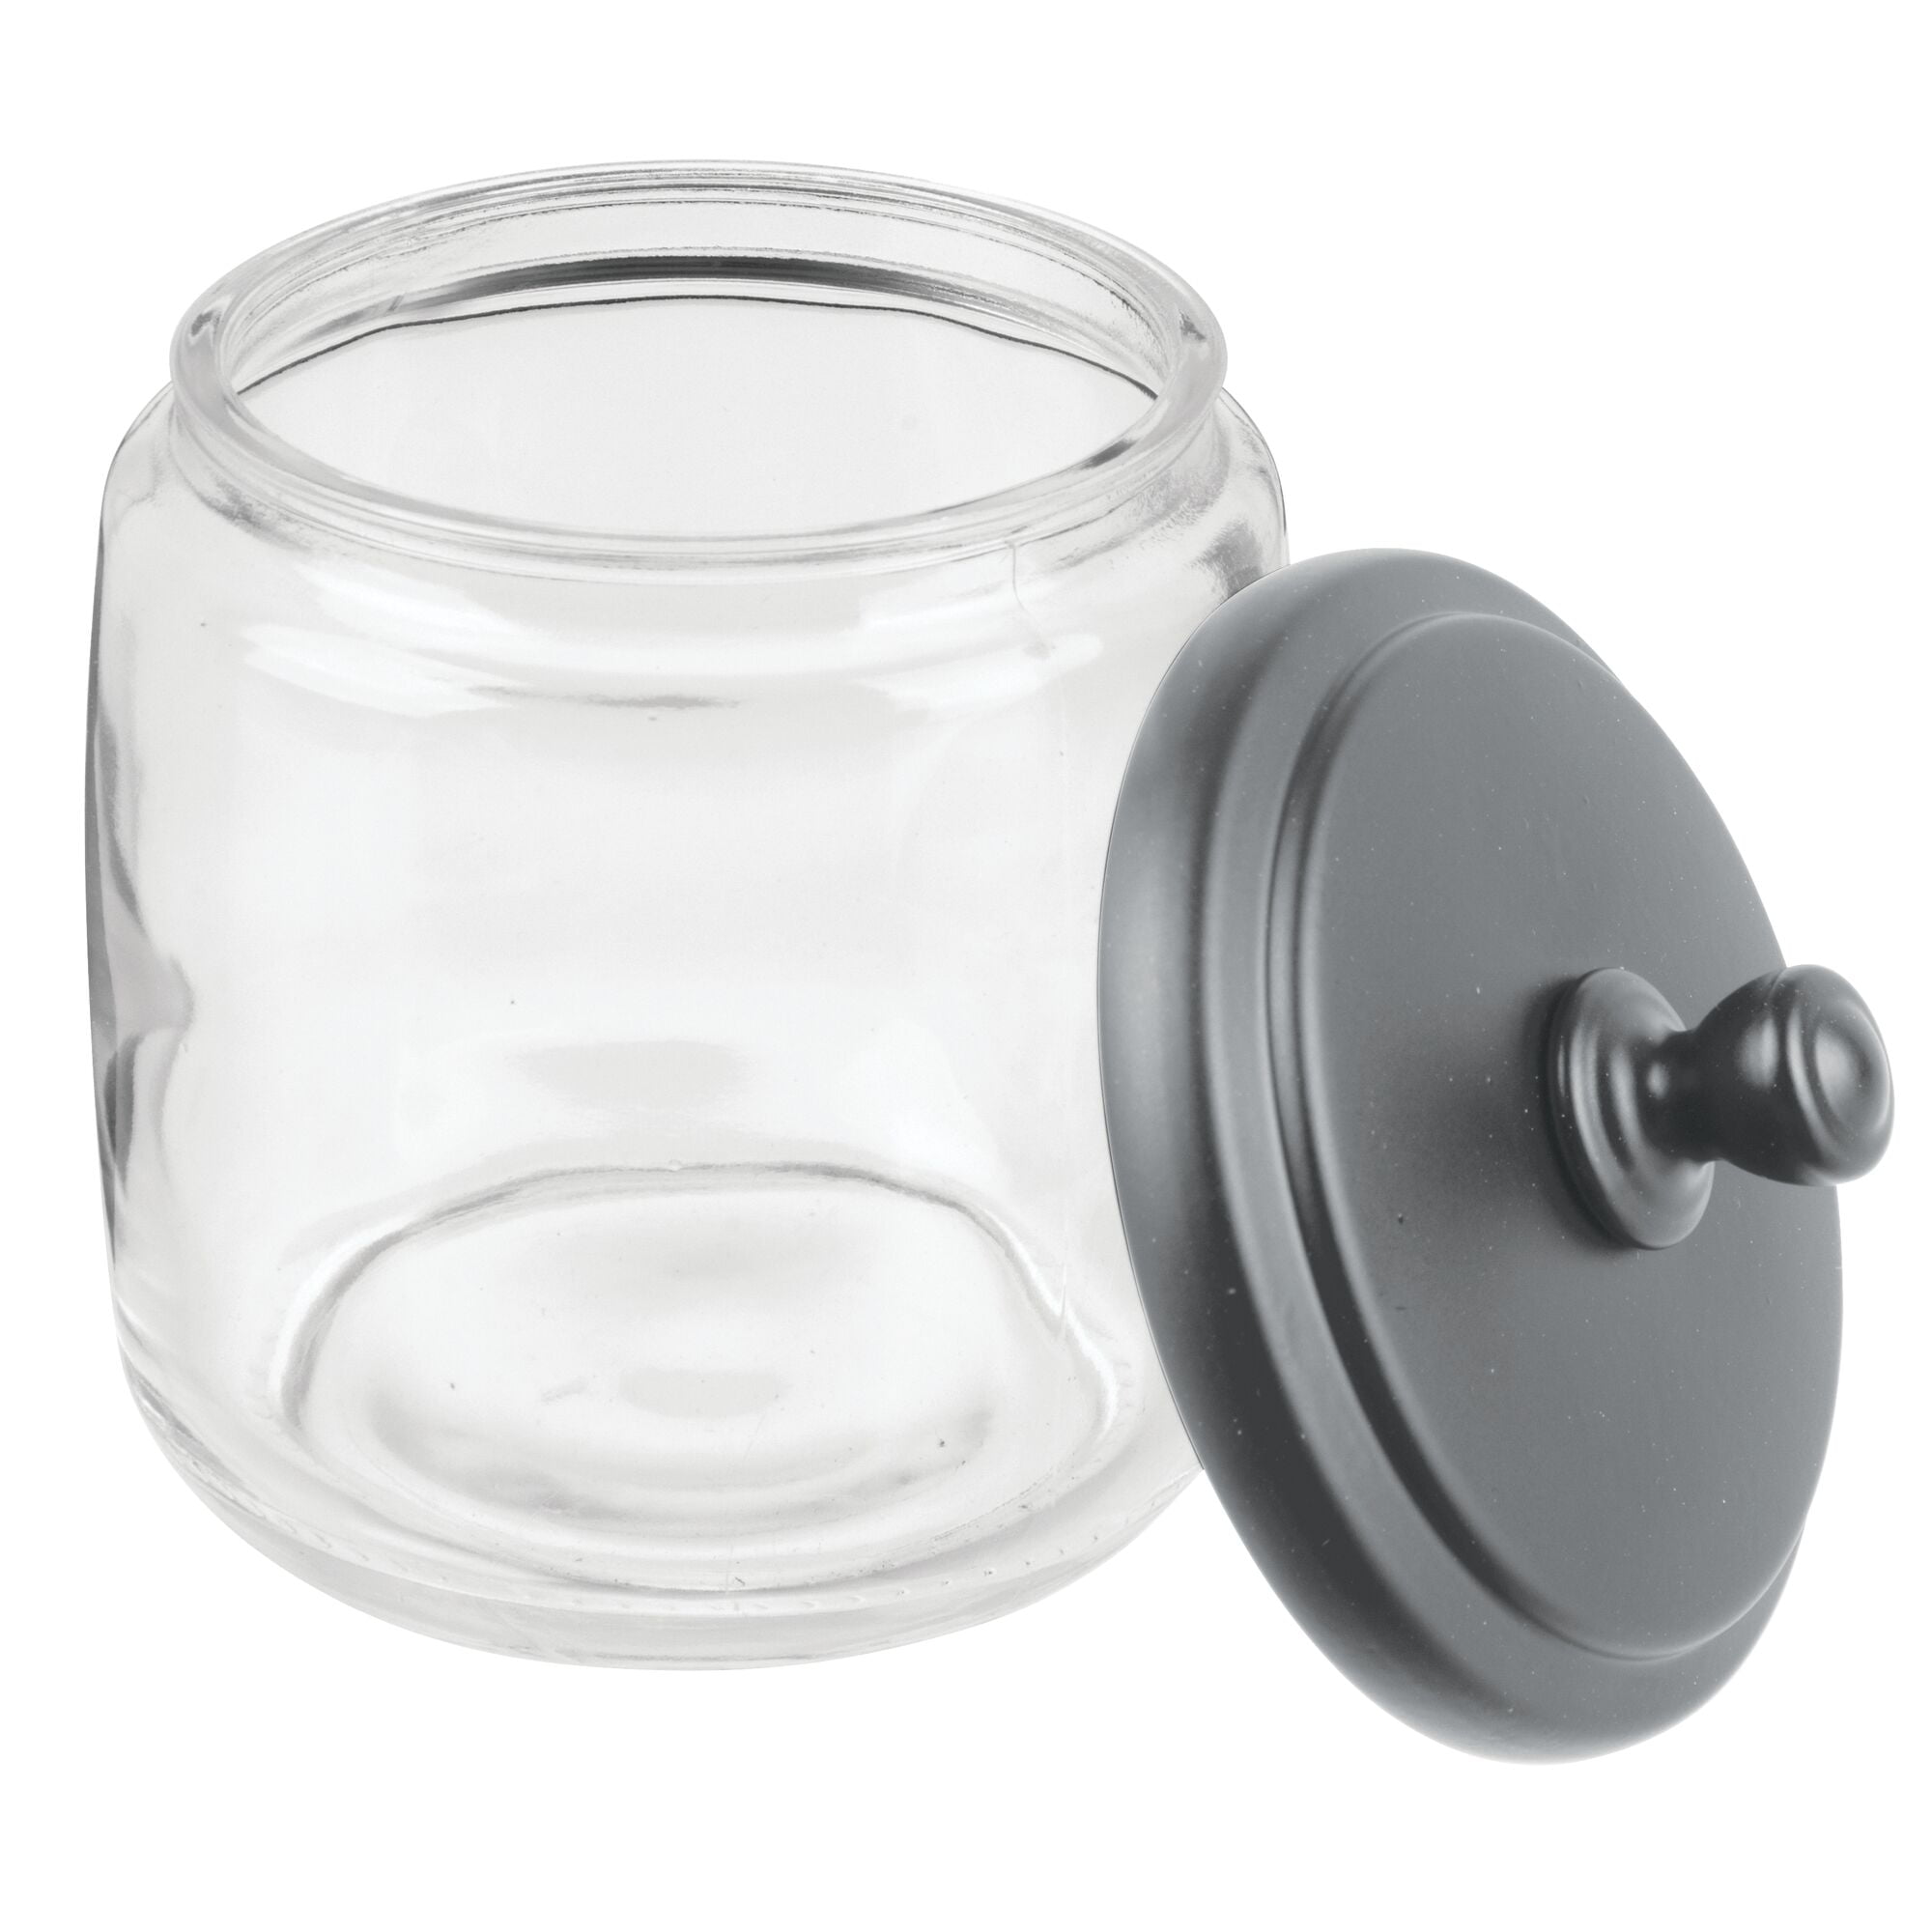 Apothecary Jar Large Glass Cookie Jar Canister Clear 7.75” Tall